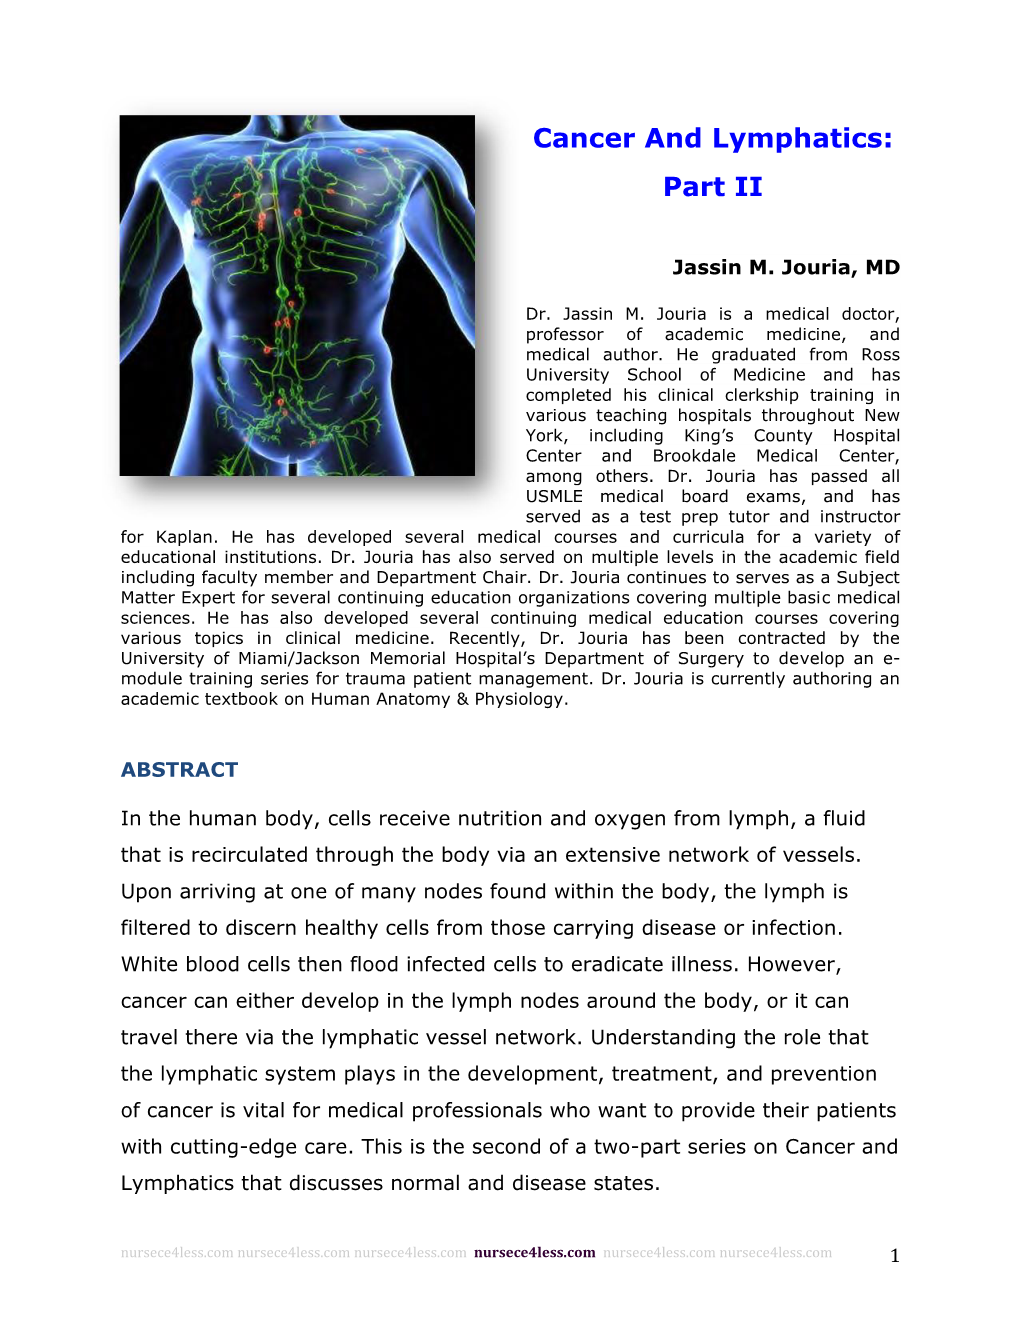 Cancer and Lymphatics Part II